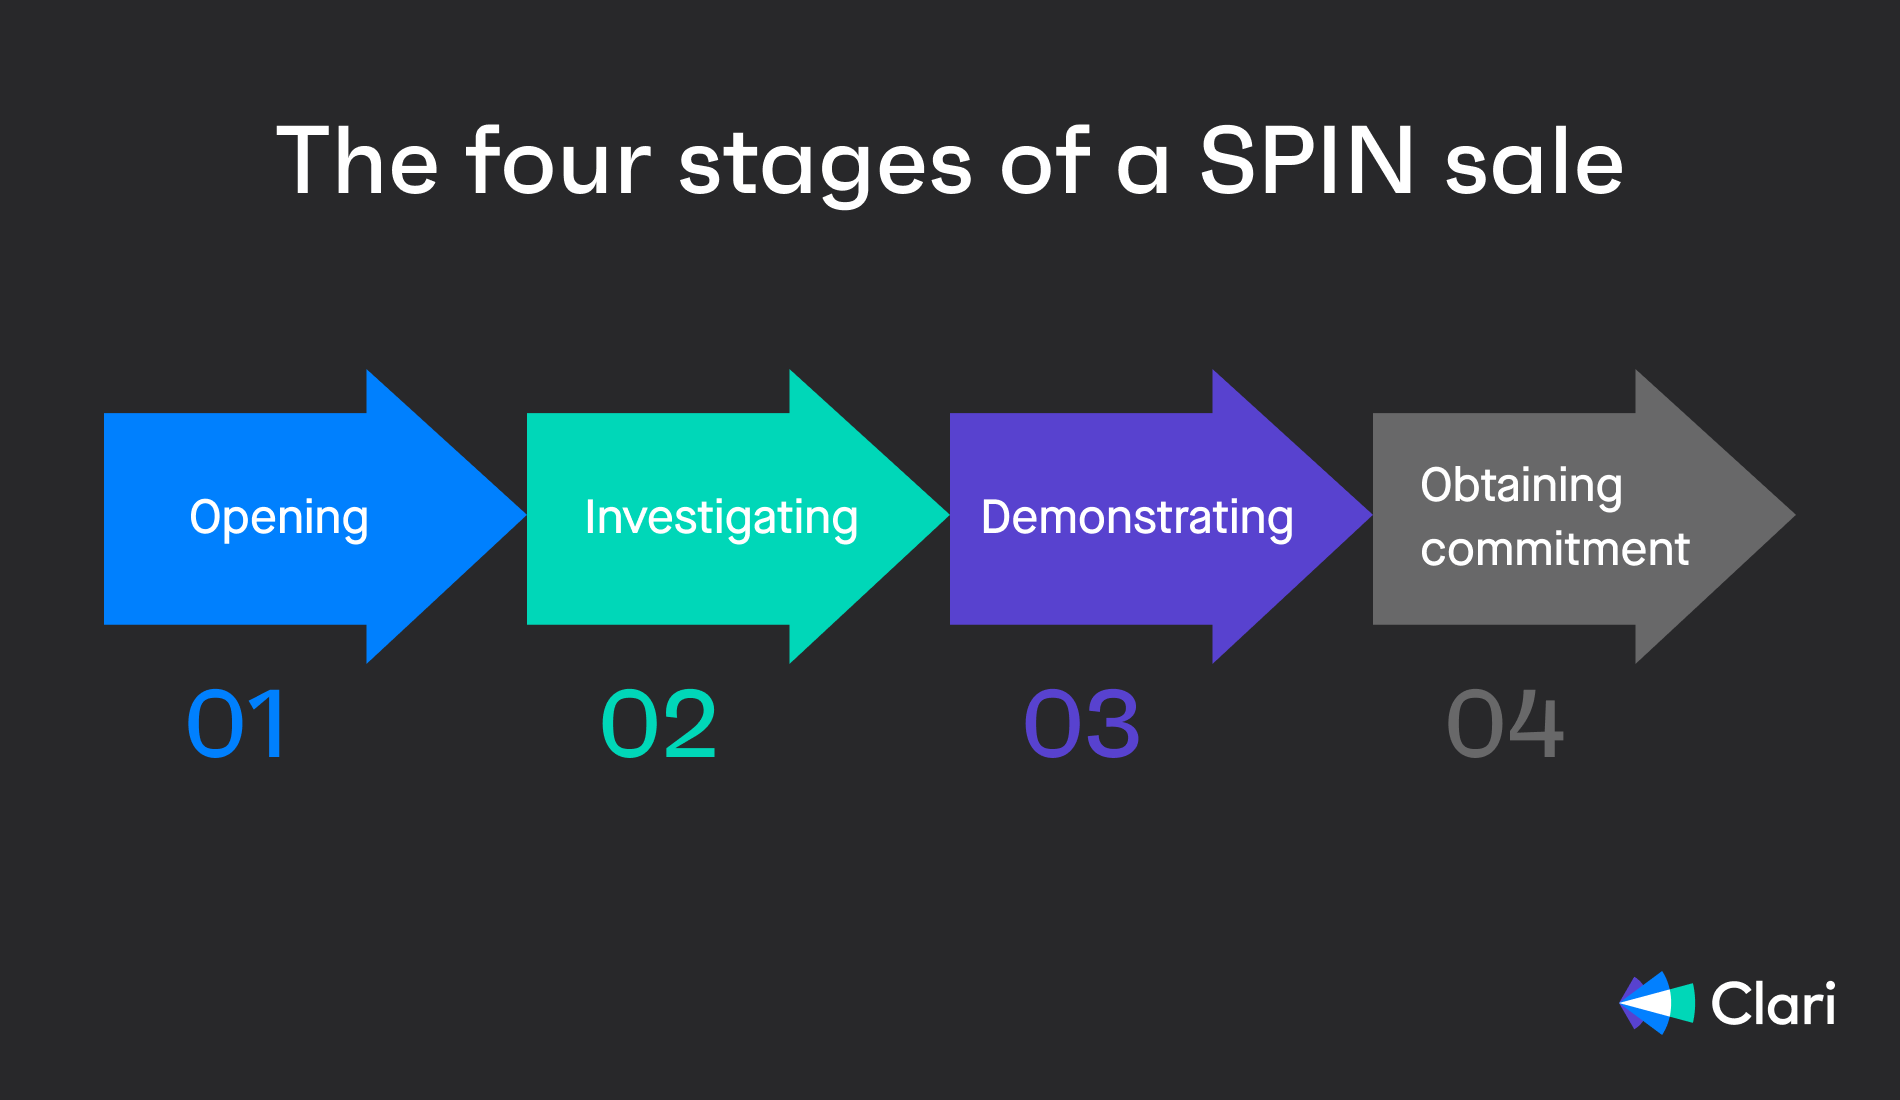 The four stages of a SPIN sale